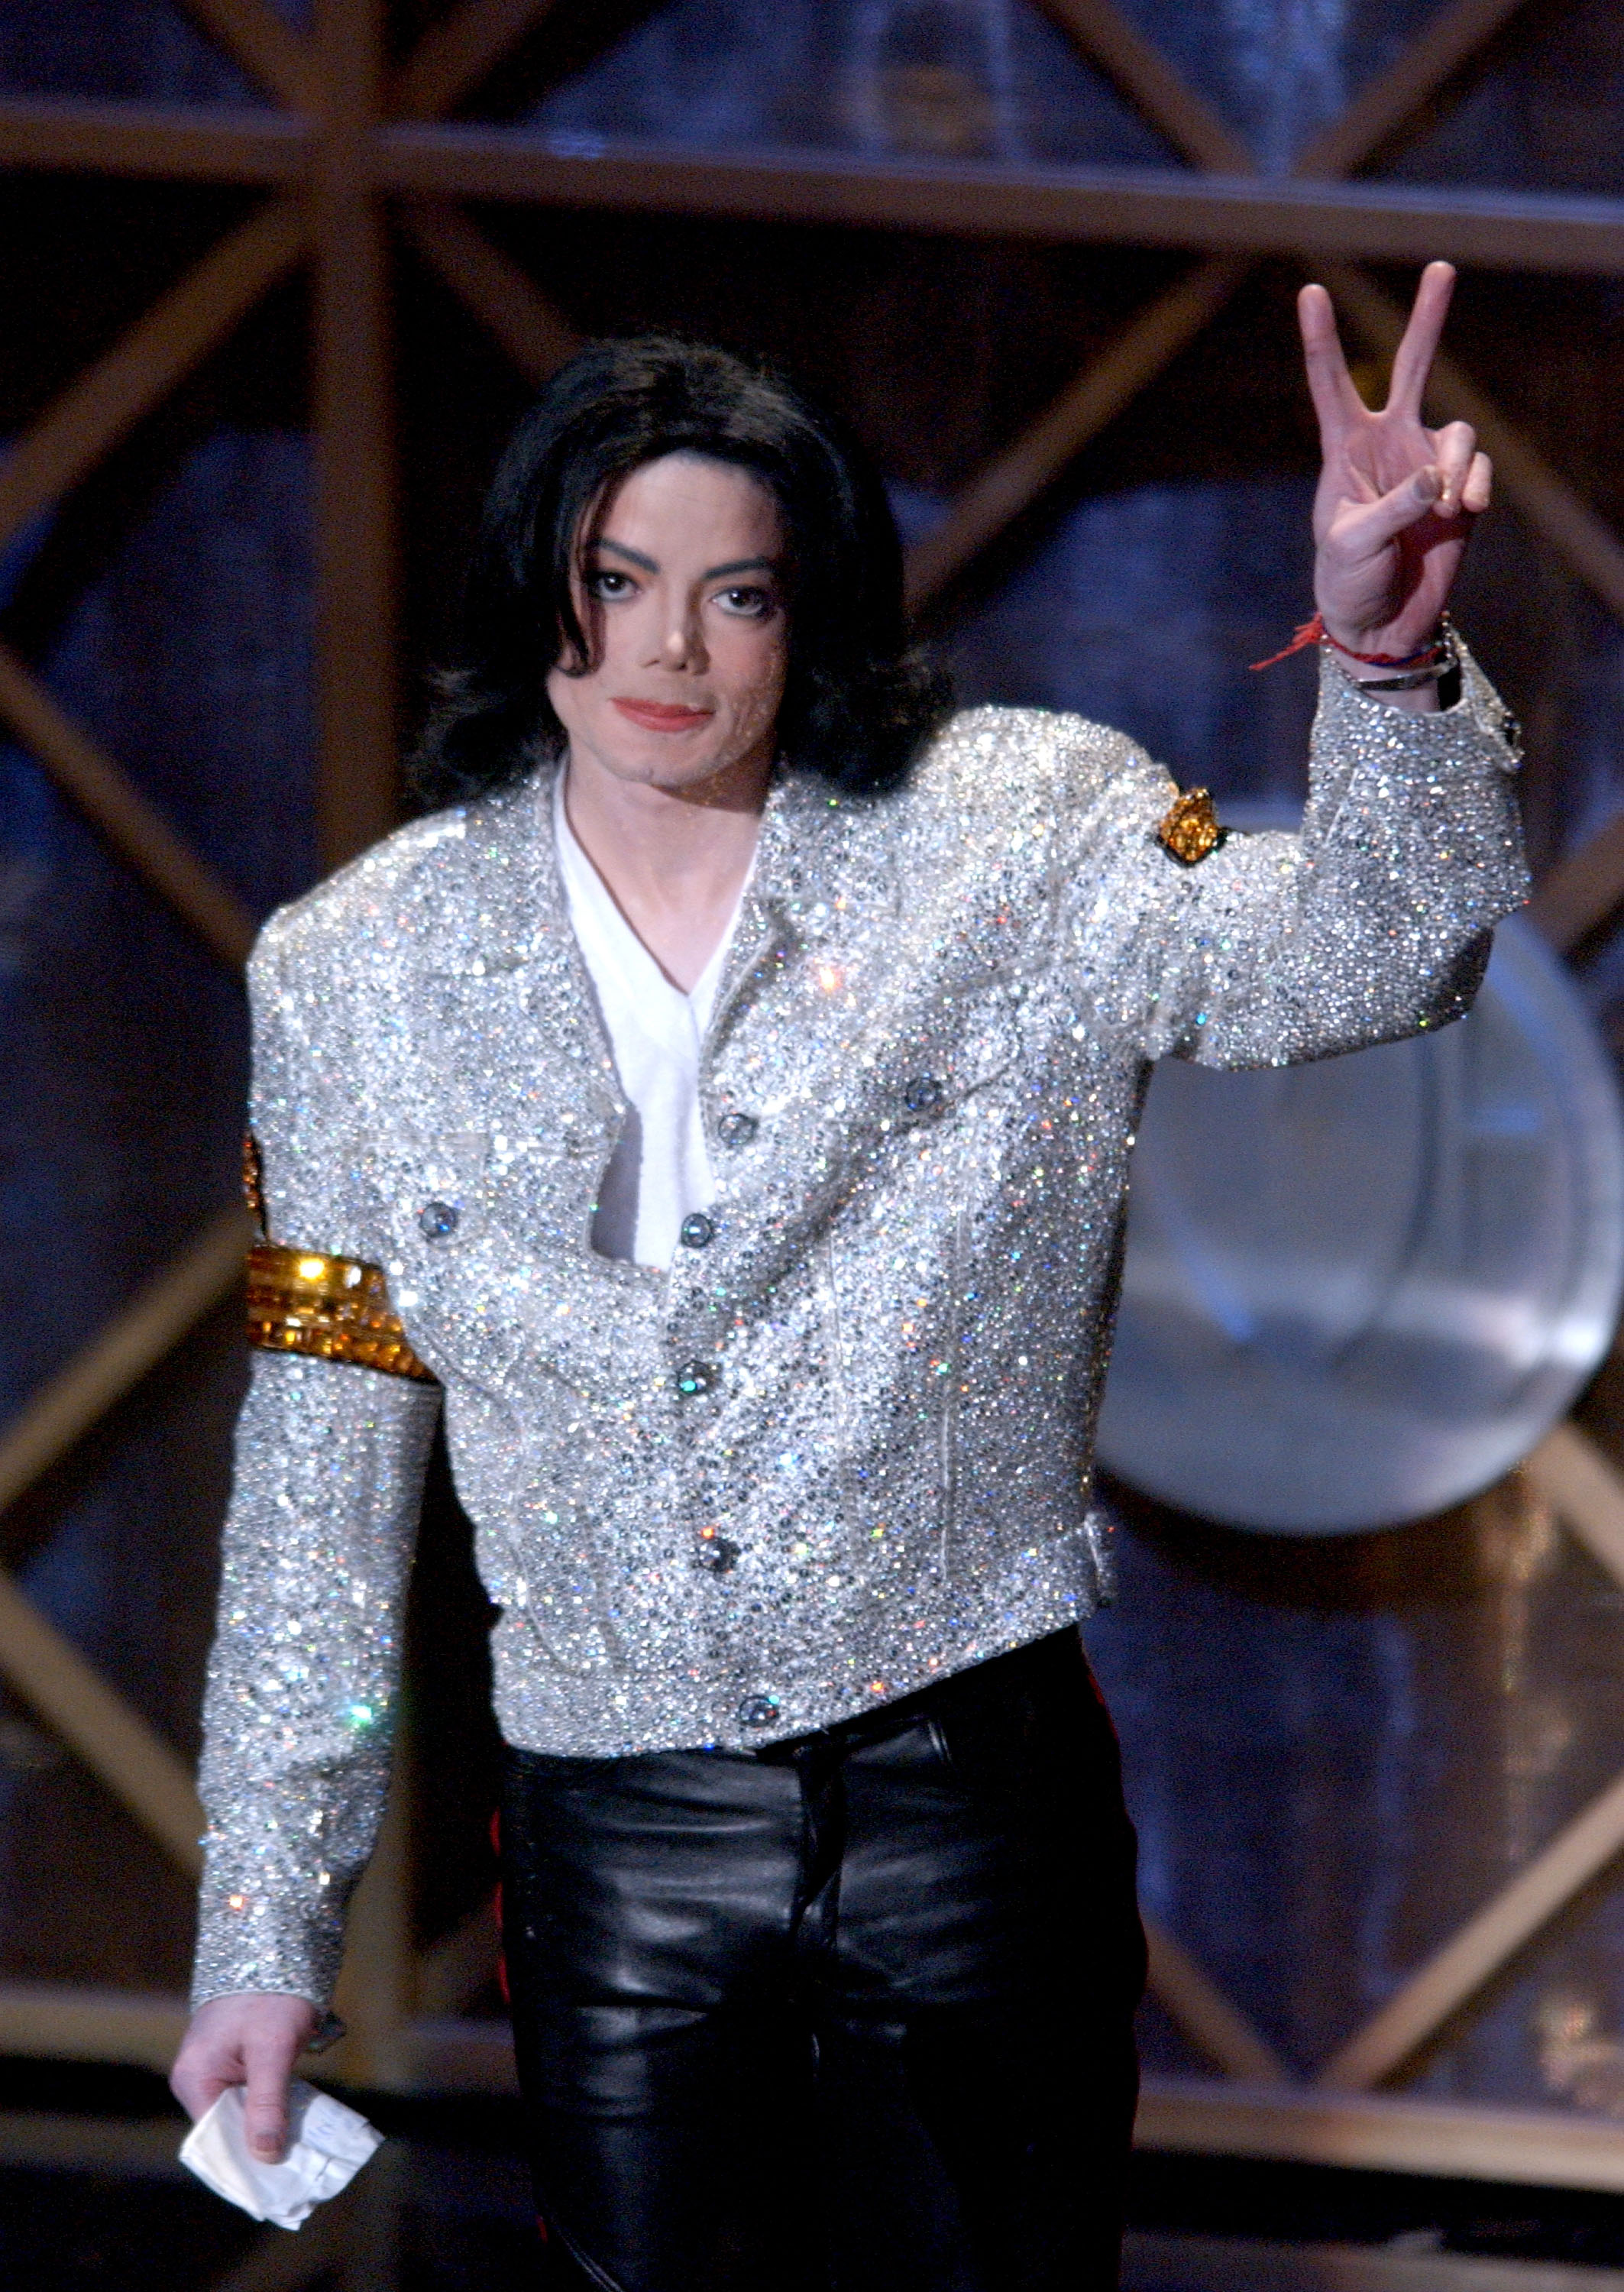 Michael Jackson at the 29th Annual American Music Awards (Image: Getty Images)